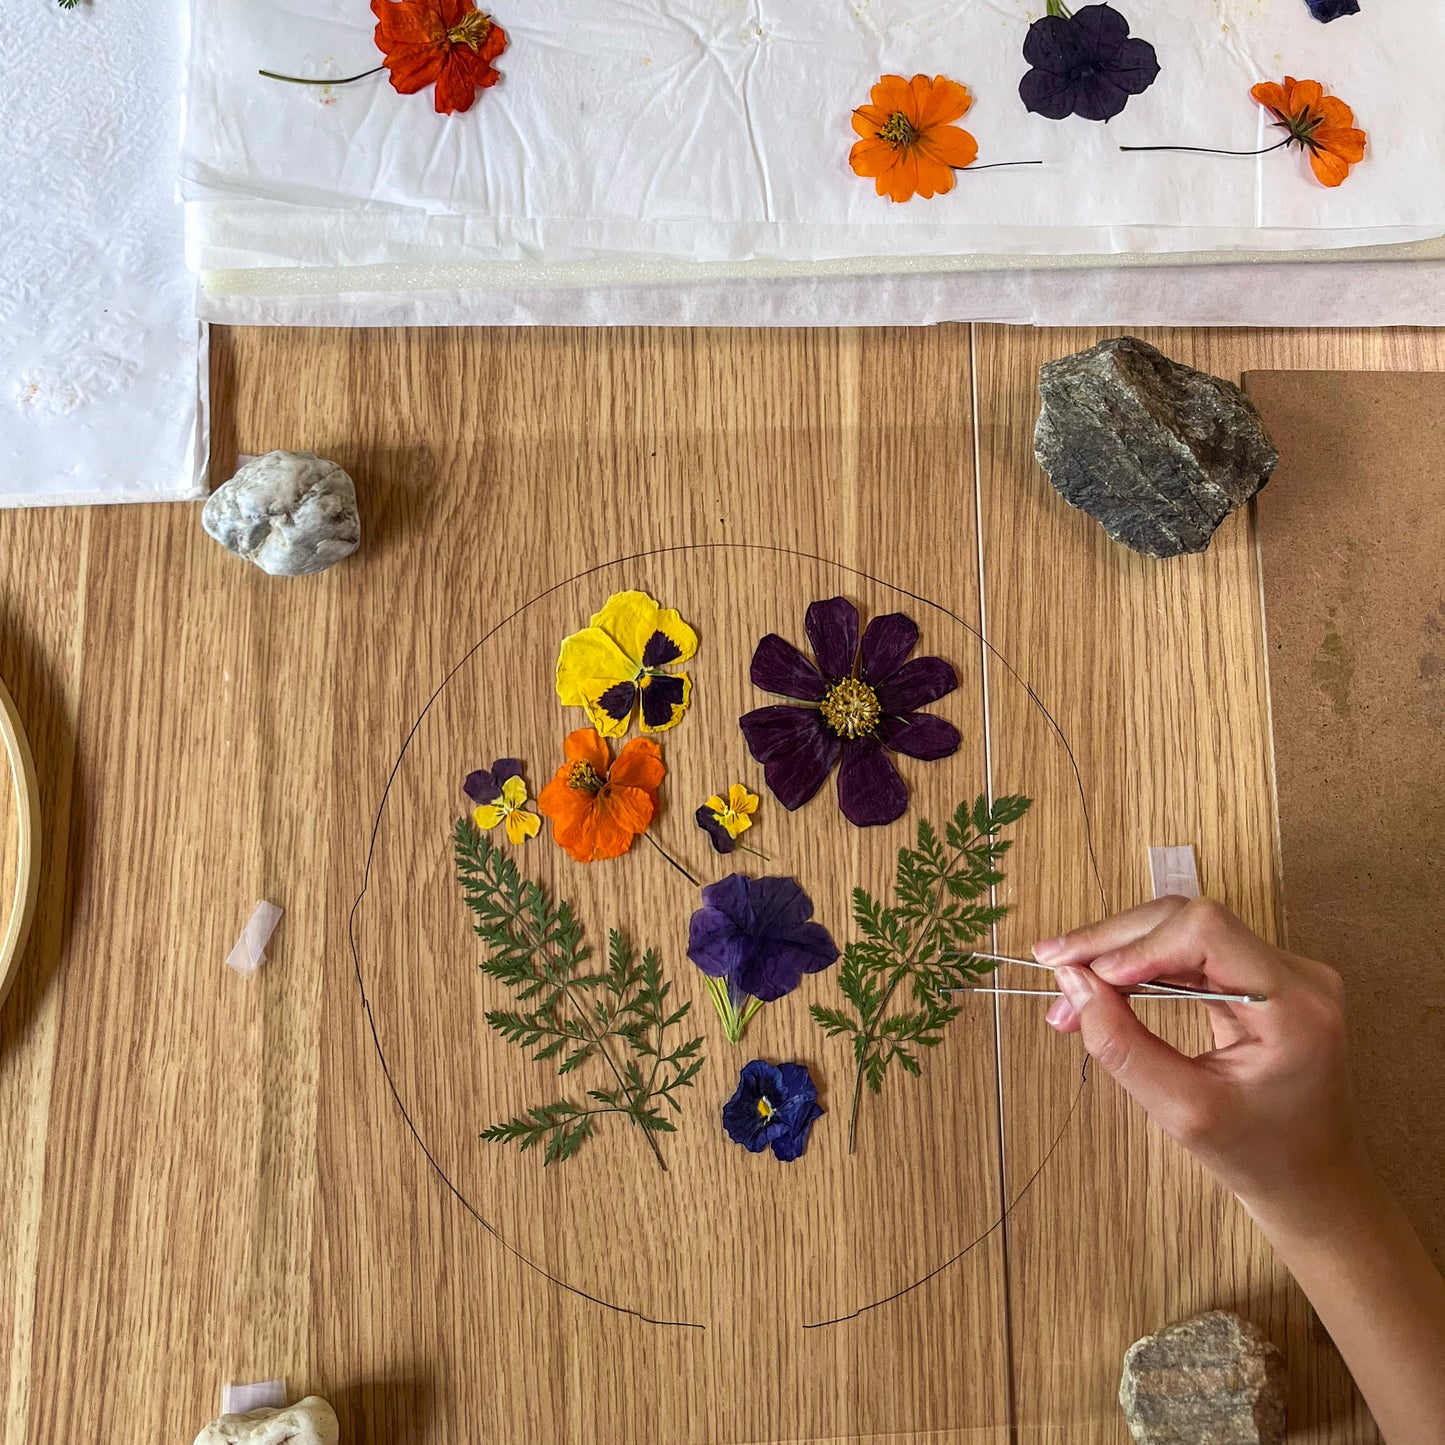 Kids Summer 3-Day Workshop | Eco-Printing and Handmade Paper | Age 8-14 | August 6th-8th | 9:30am - 12pm